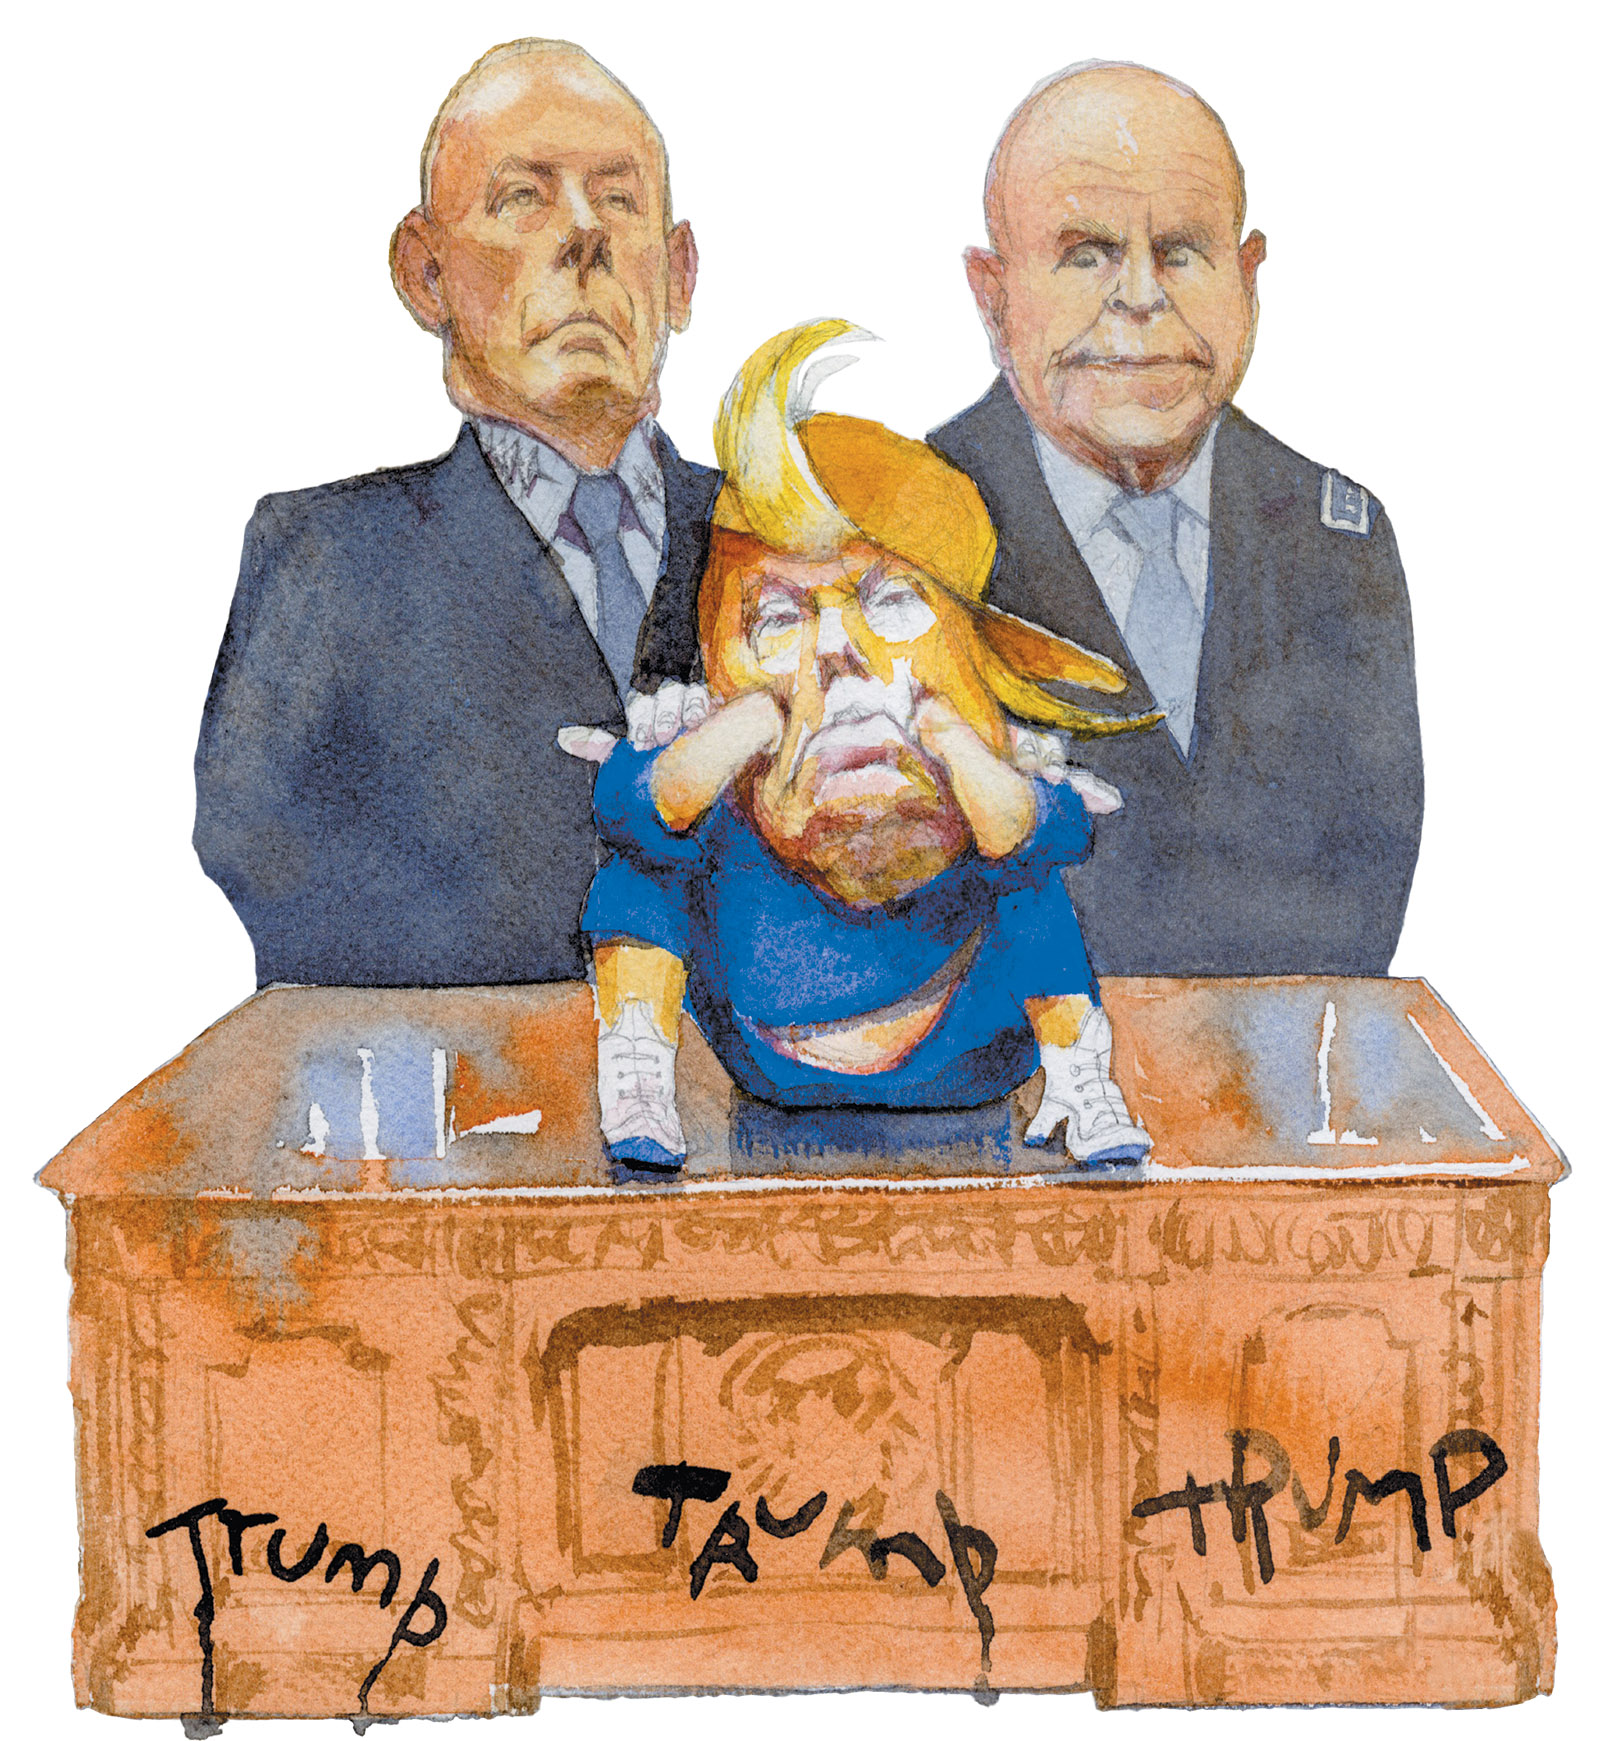 John Kelly, Donald Trump and H.R. McMaster; drawing by Siegfried Woldhek